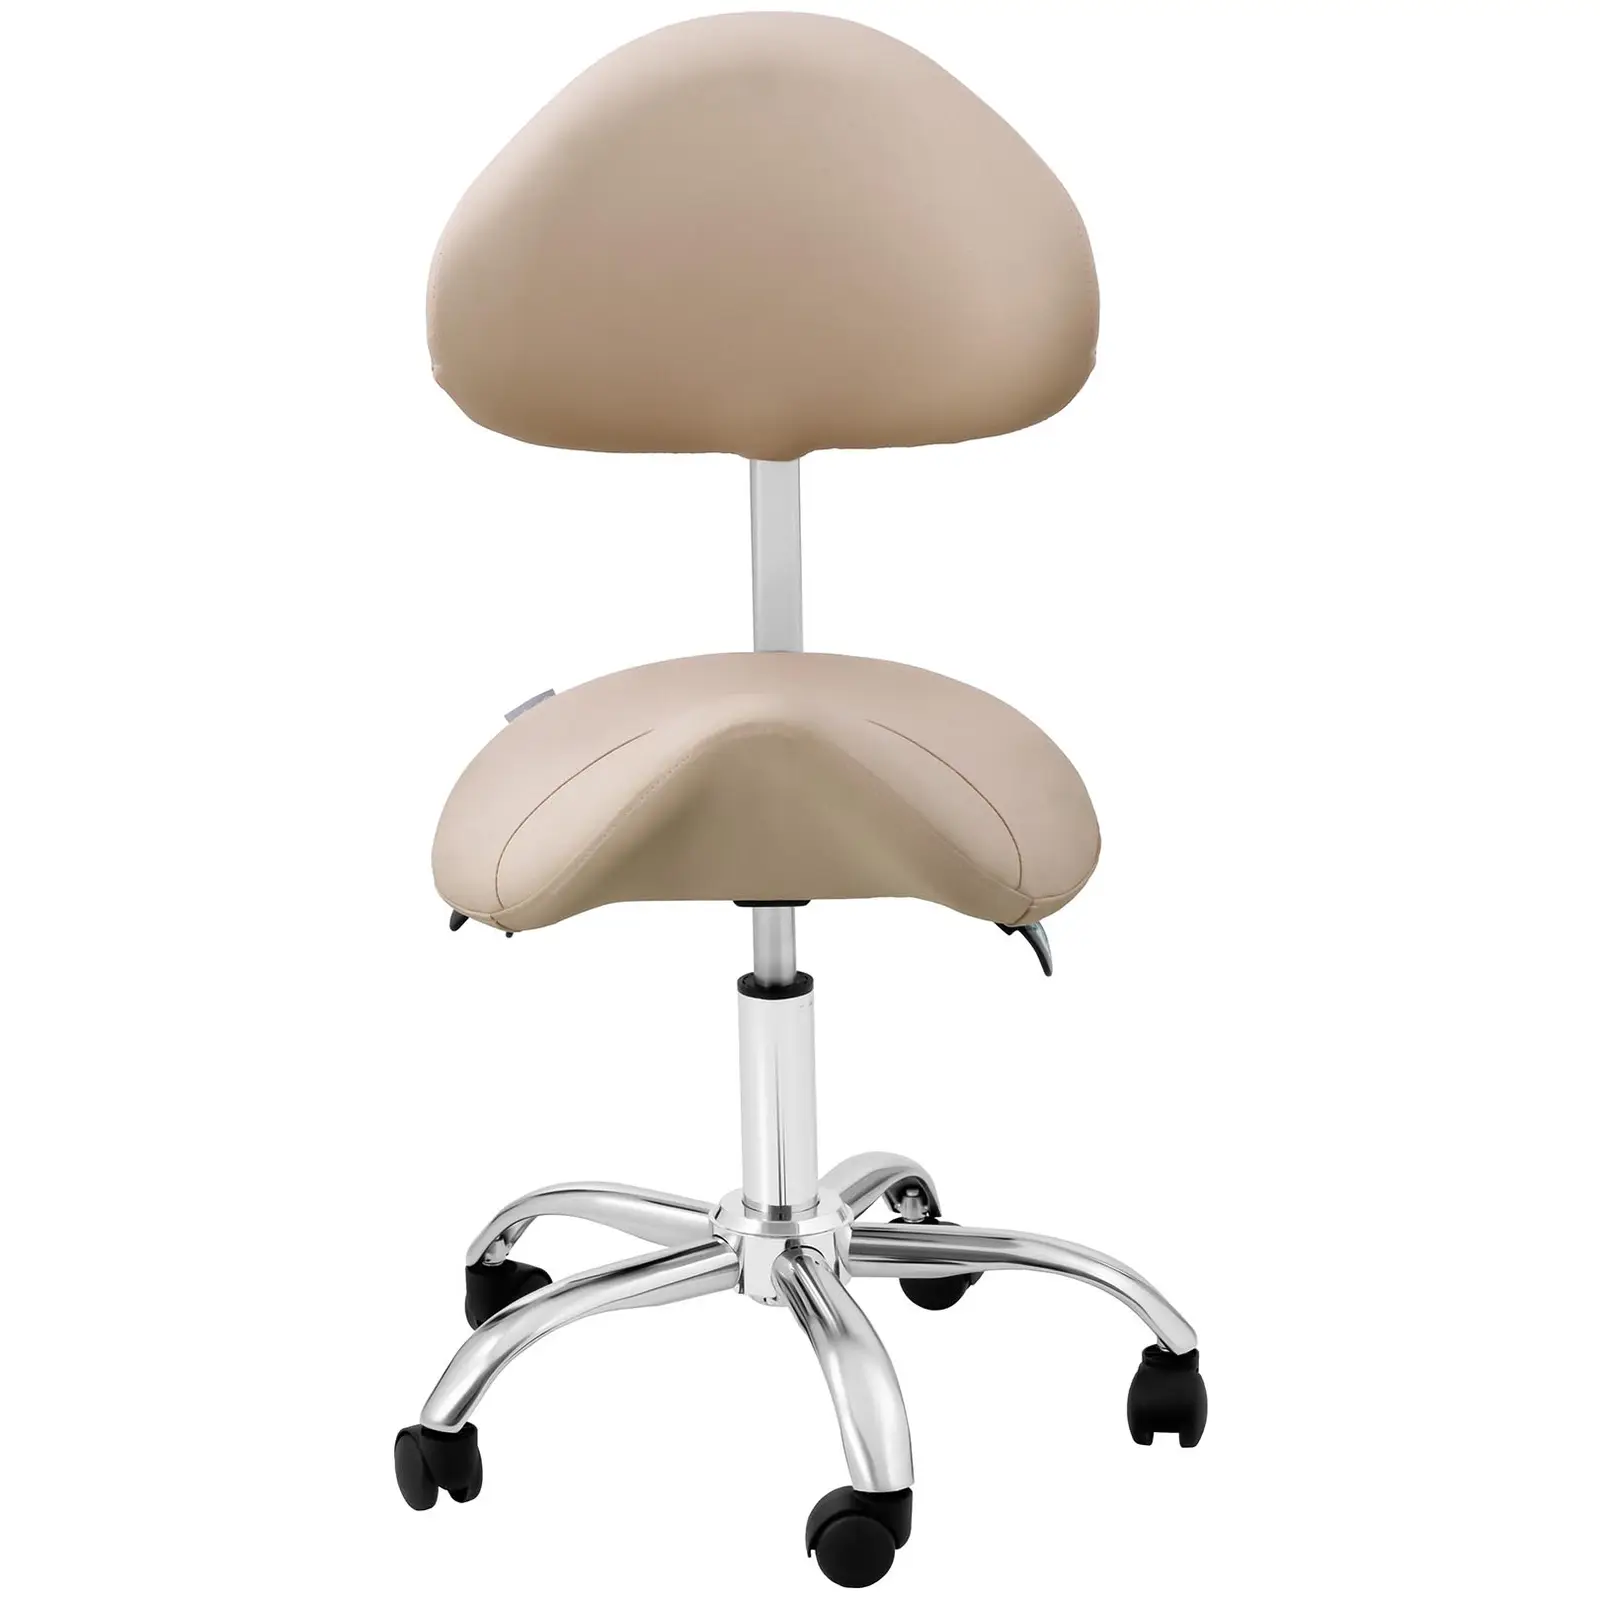 Saddle Chair - height-adjustable backrest and seat height - 55 - 69 cm - 150 kg - Cream, Silver